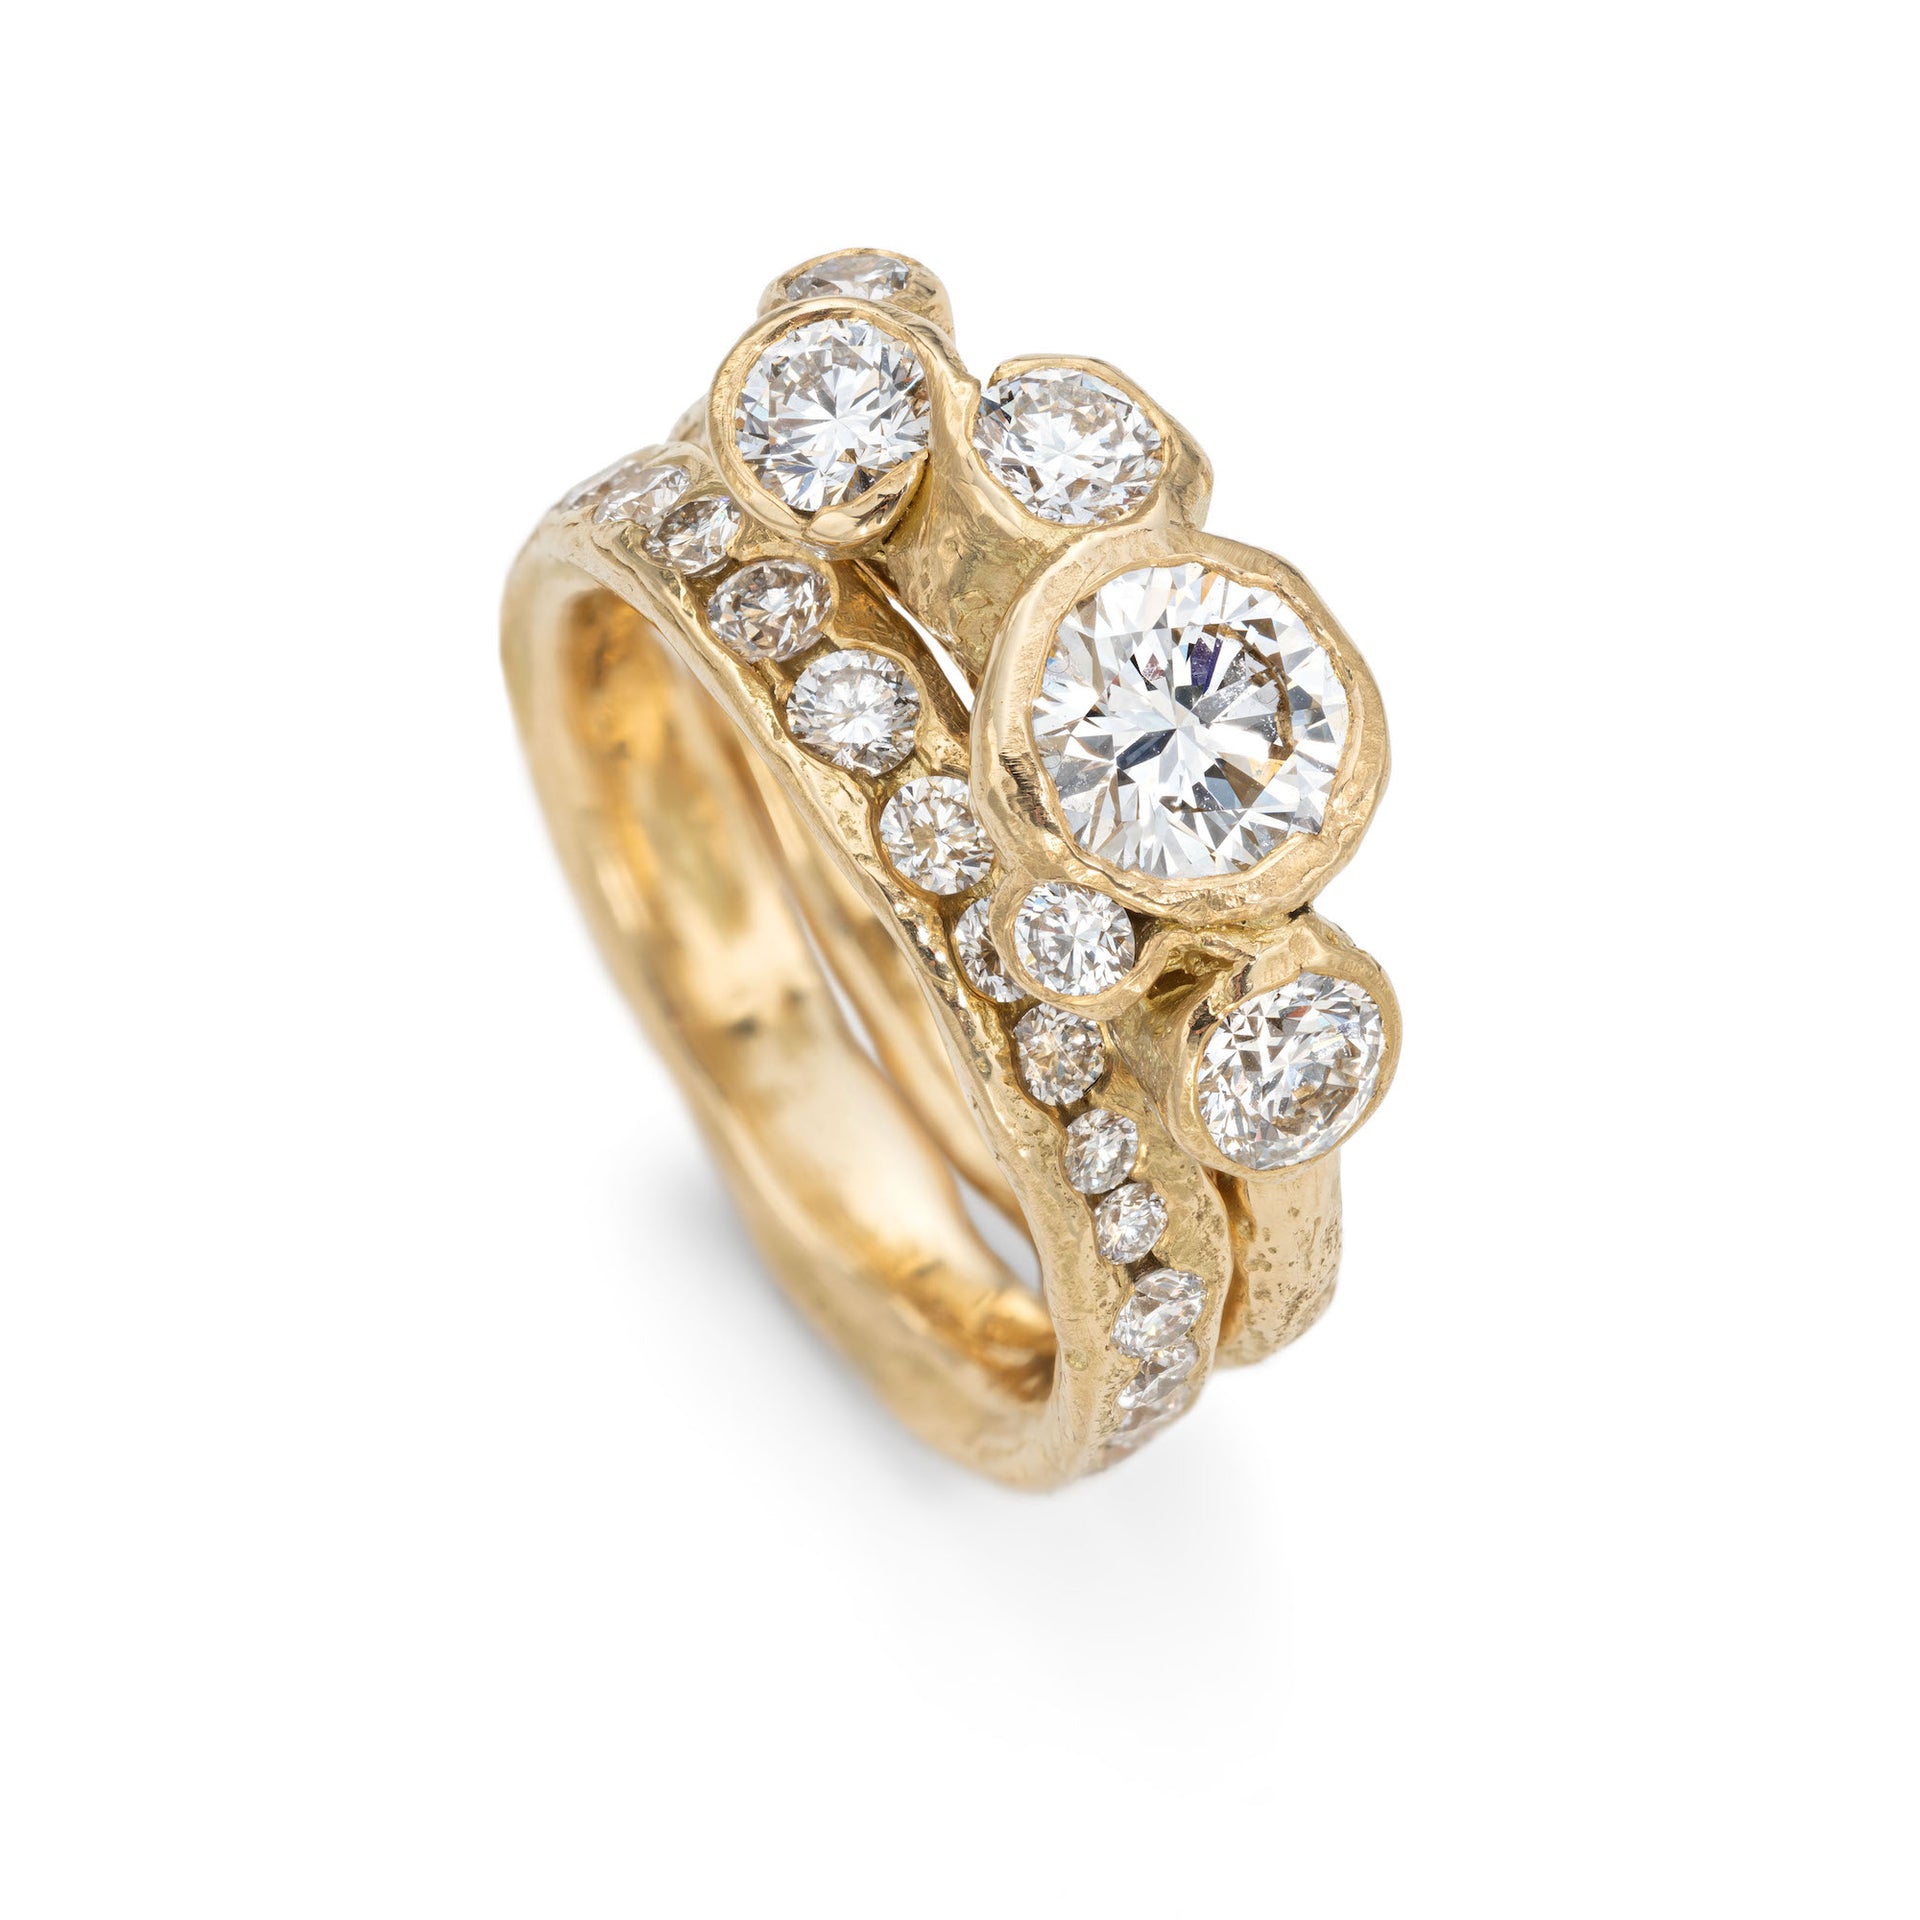 Upright, front view of an 18ct gold engagement ring, set with bright white six diamonds. Photographed next to a diamond channel ring, set with diamonds all the way around the ring.